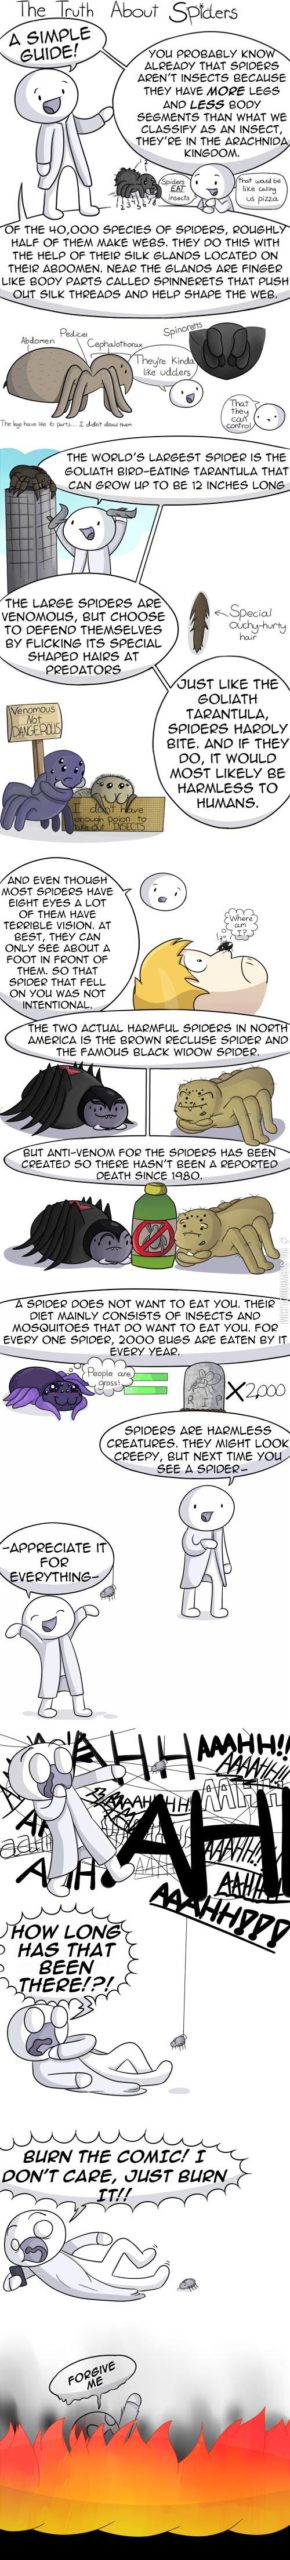 The+truth+about+spiders.